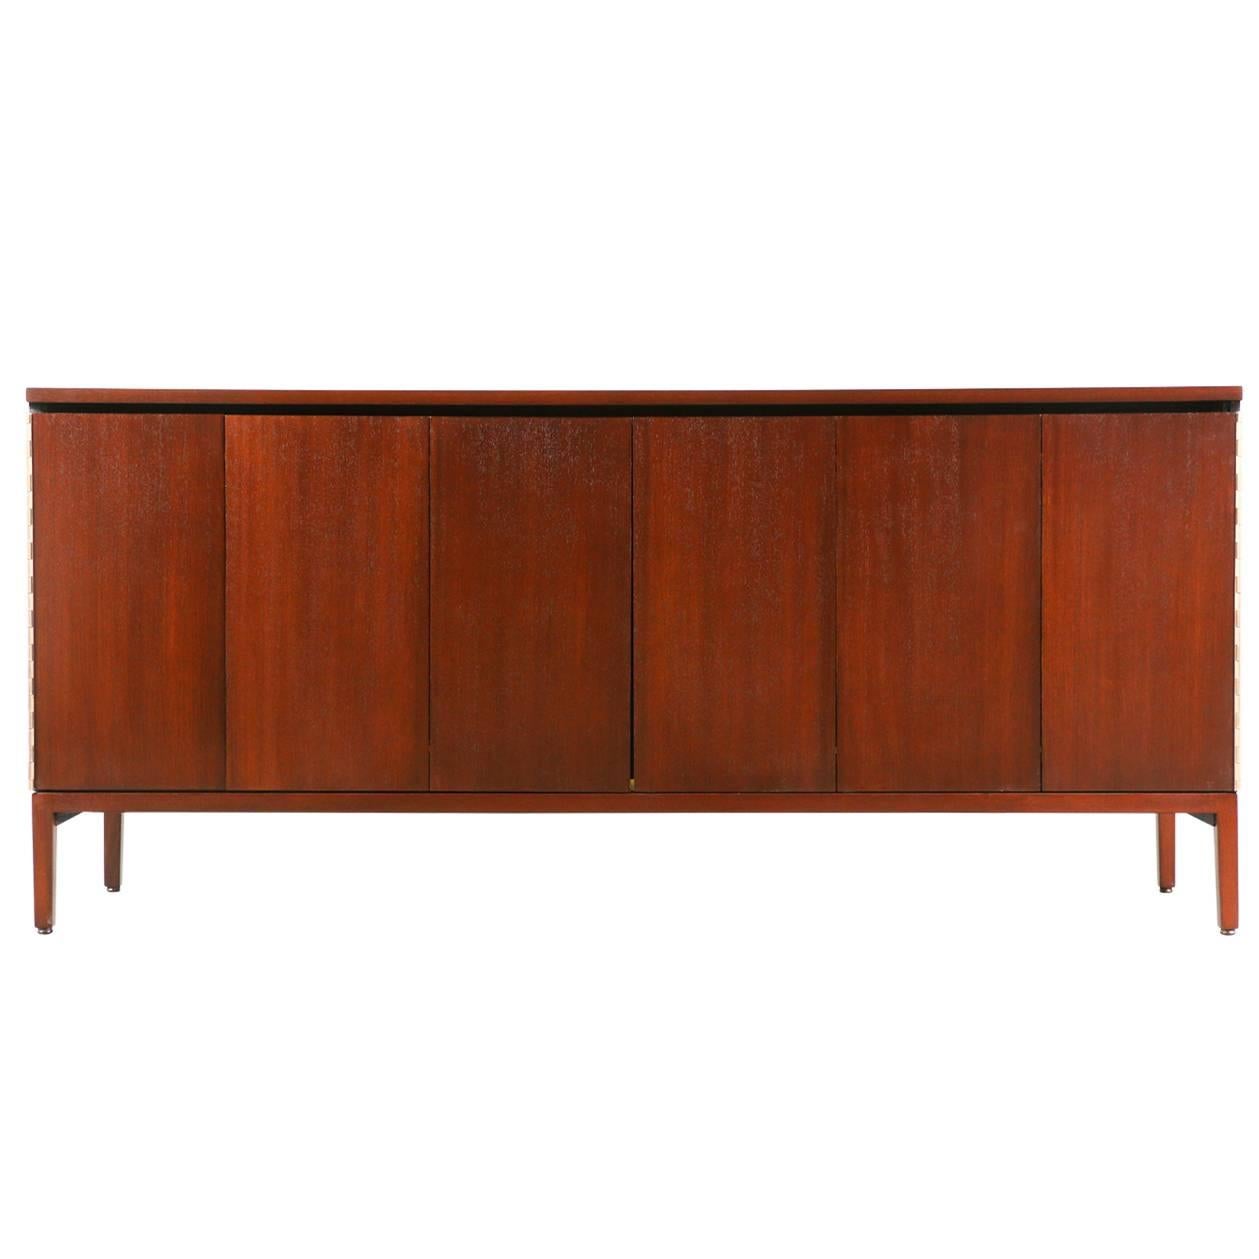 Paul McCobb “Irwin Collection” Credenza with Bi-Folding Doors for Calvin Group